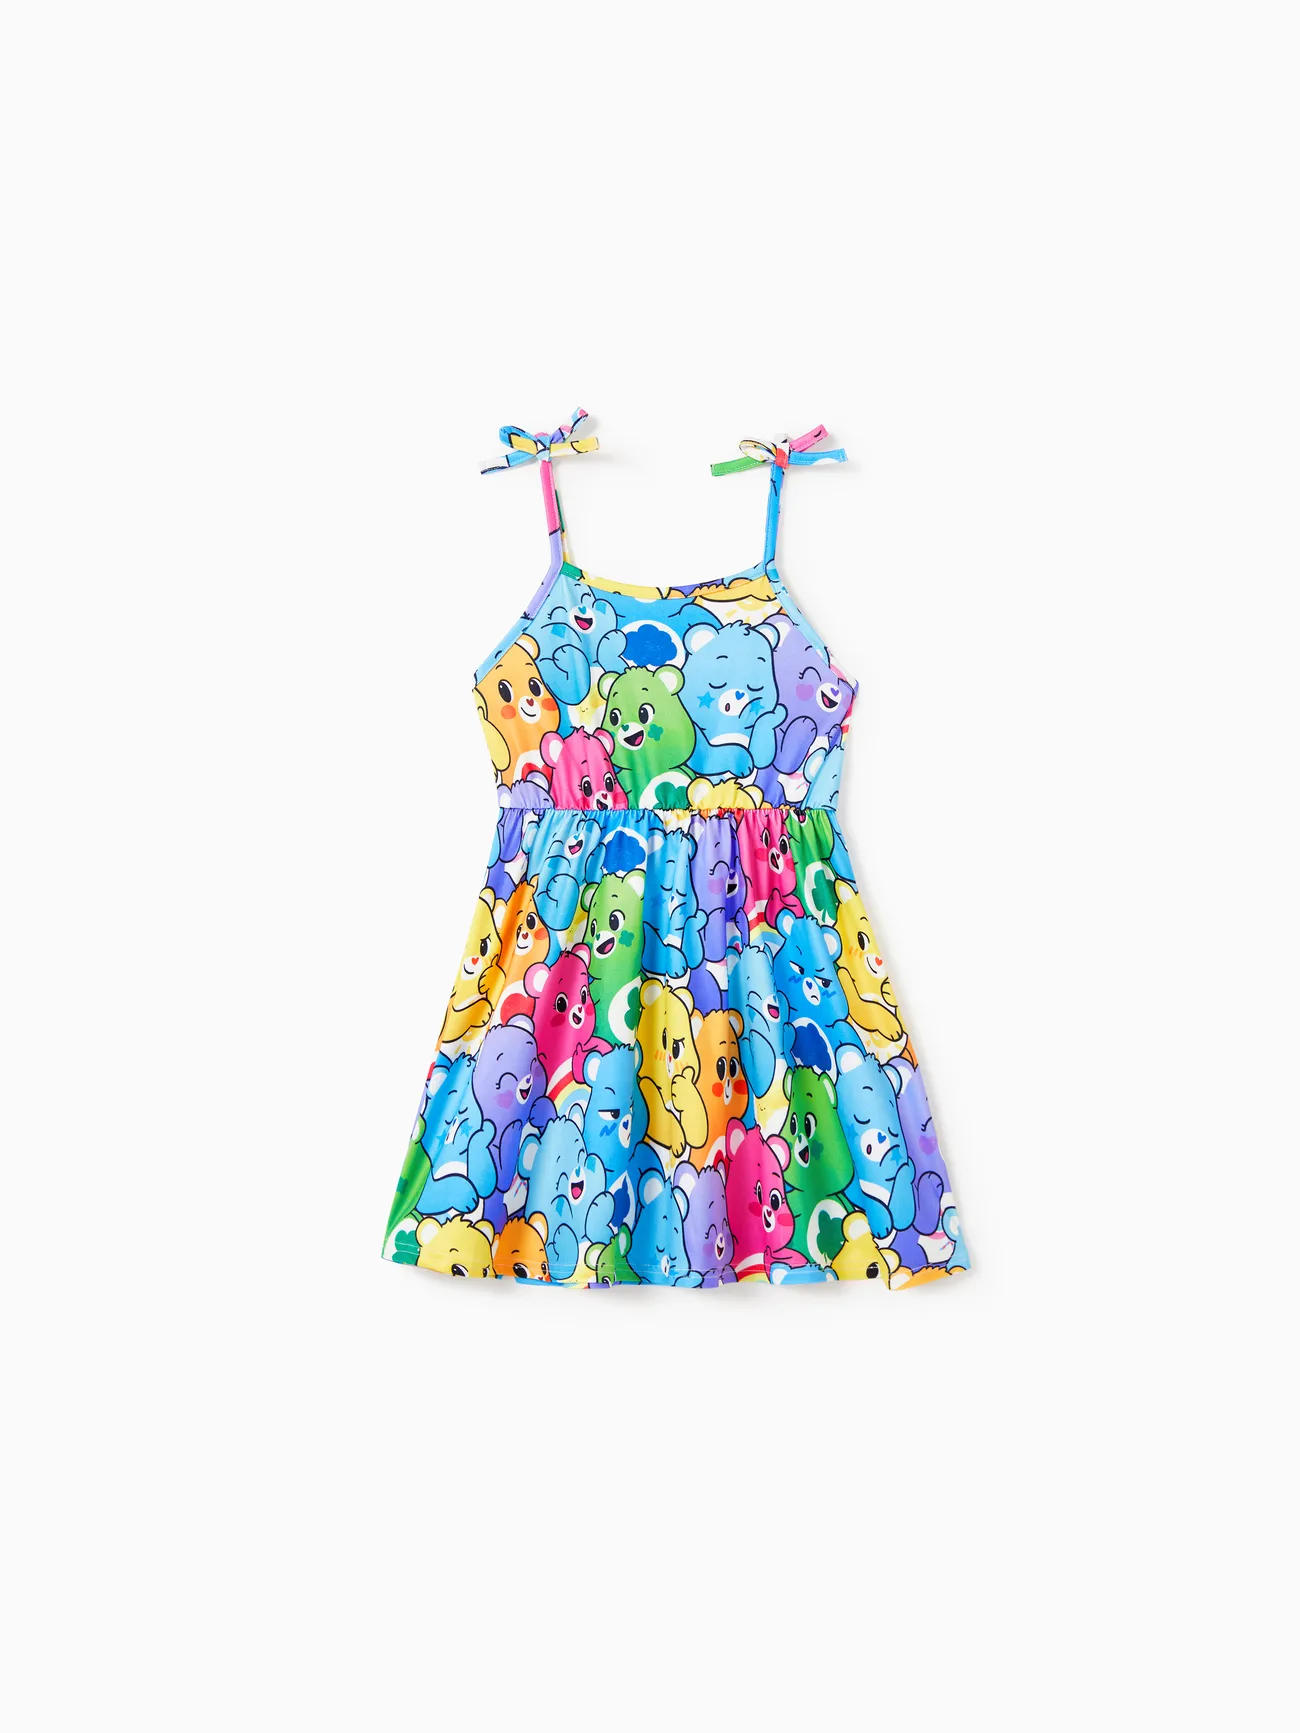 Care Bears Family Matching Colorful Character All-over Print Sleeveless Dress/Cotton Tee/Romper Multi-color big image 1